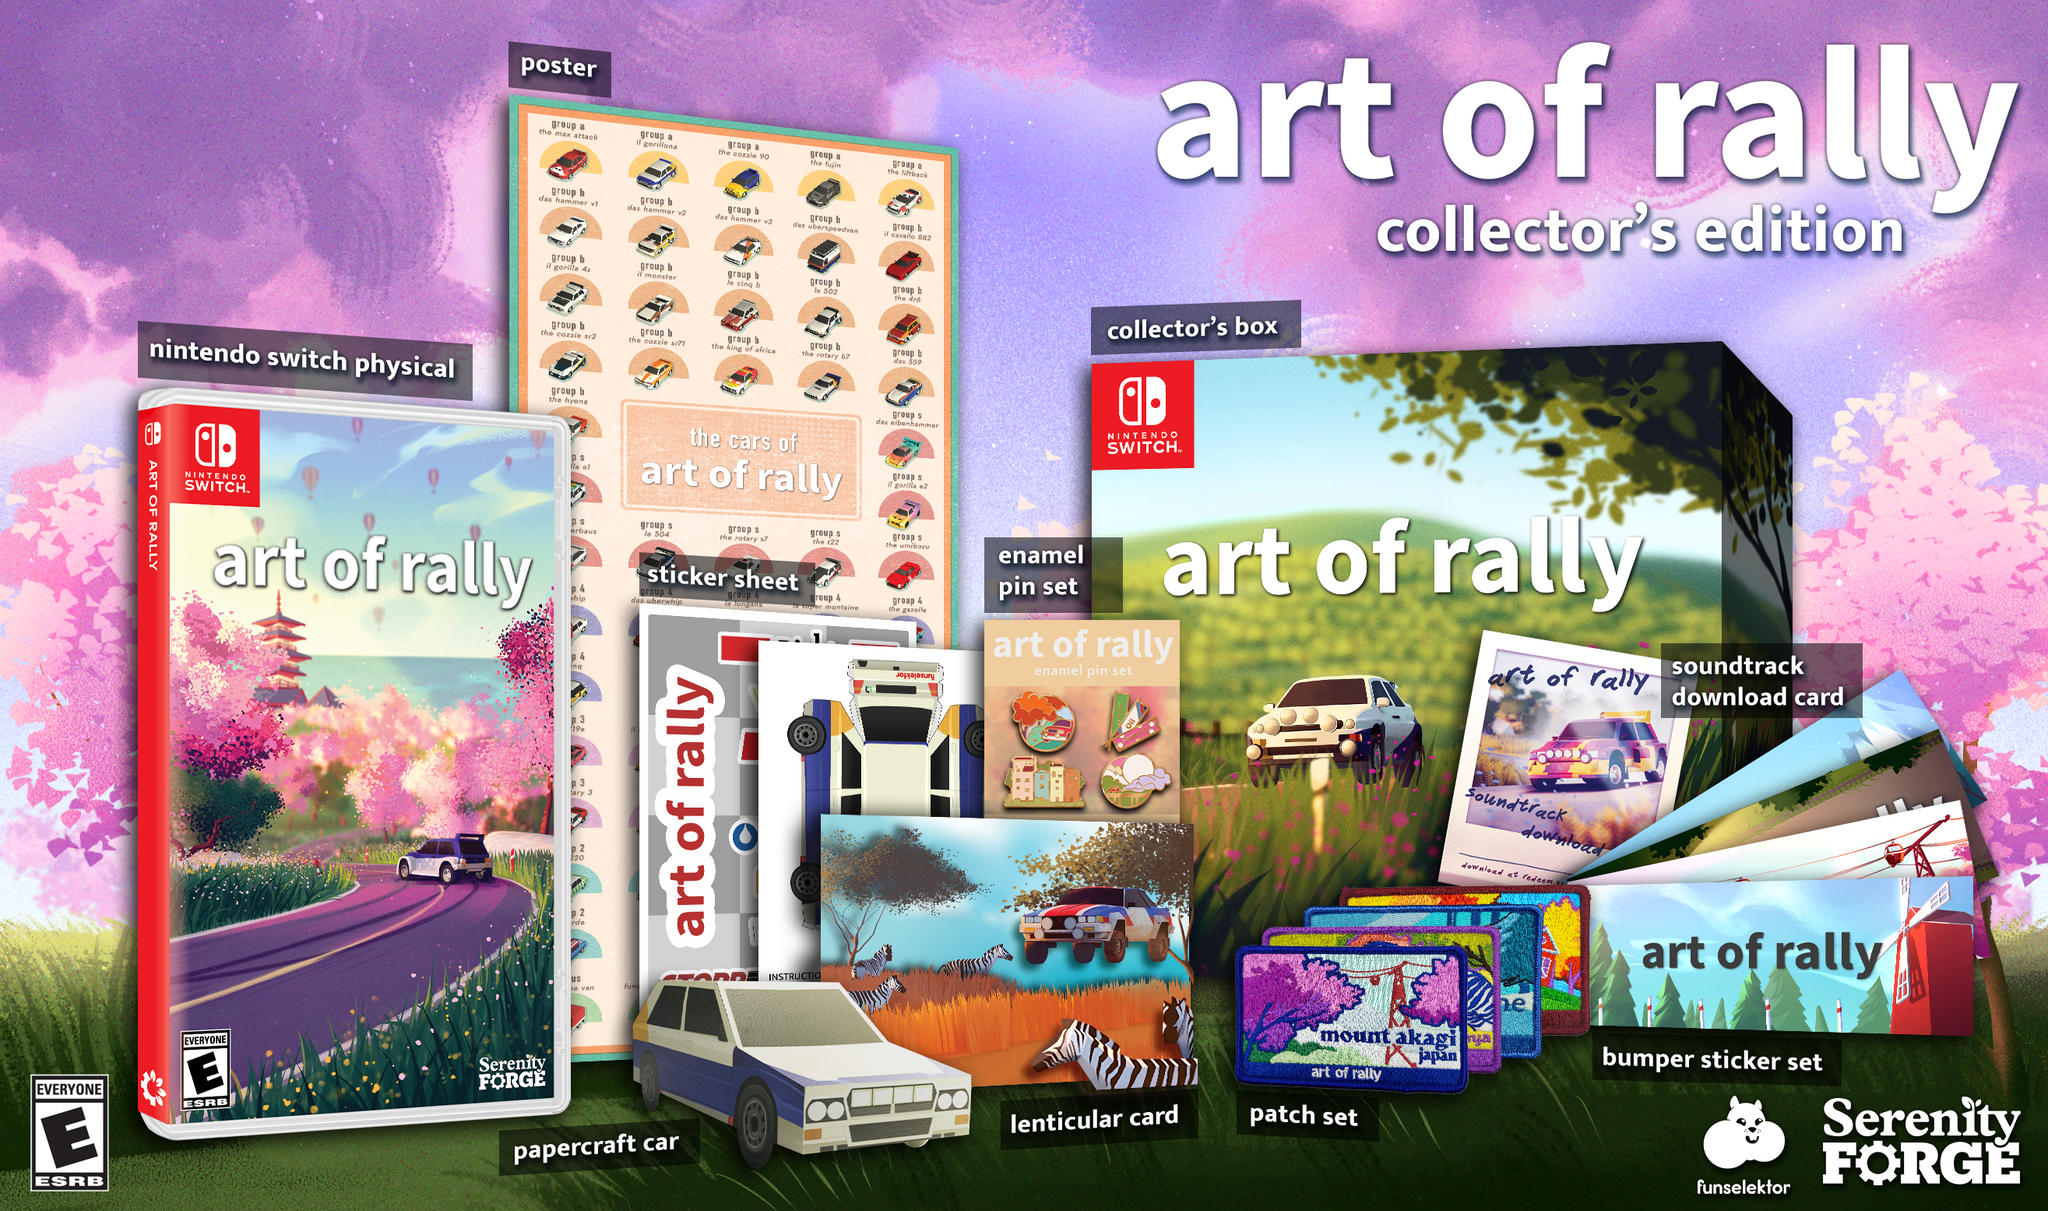 art of rally - Premium Collector's Edition